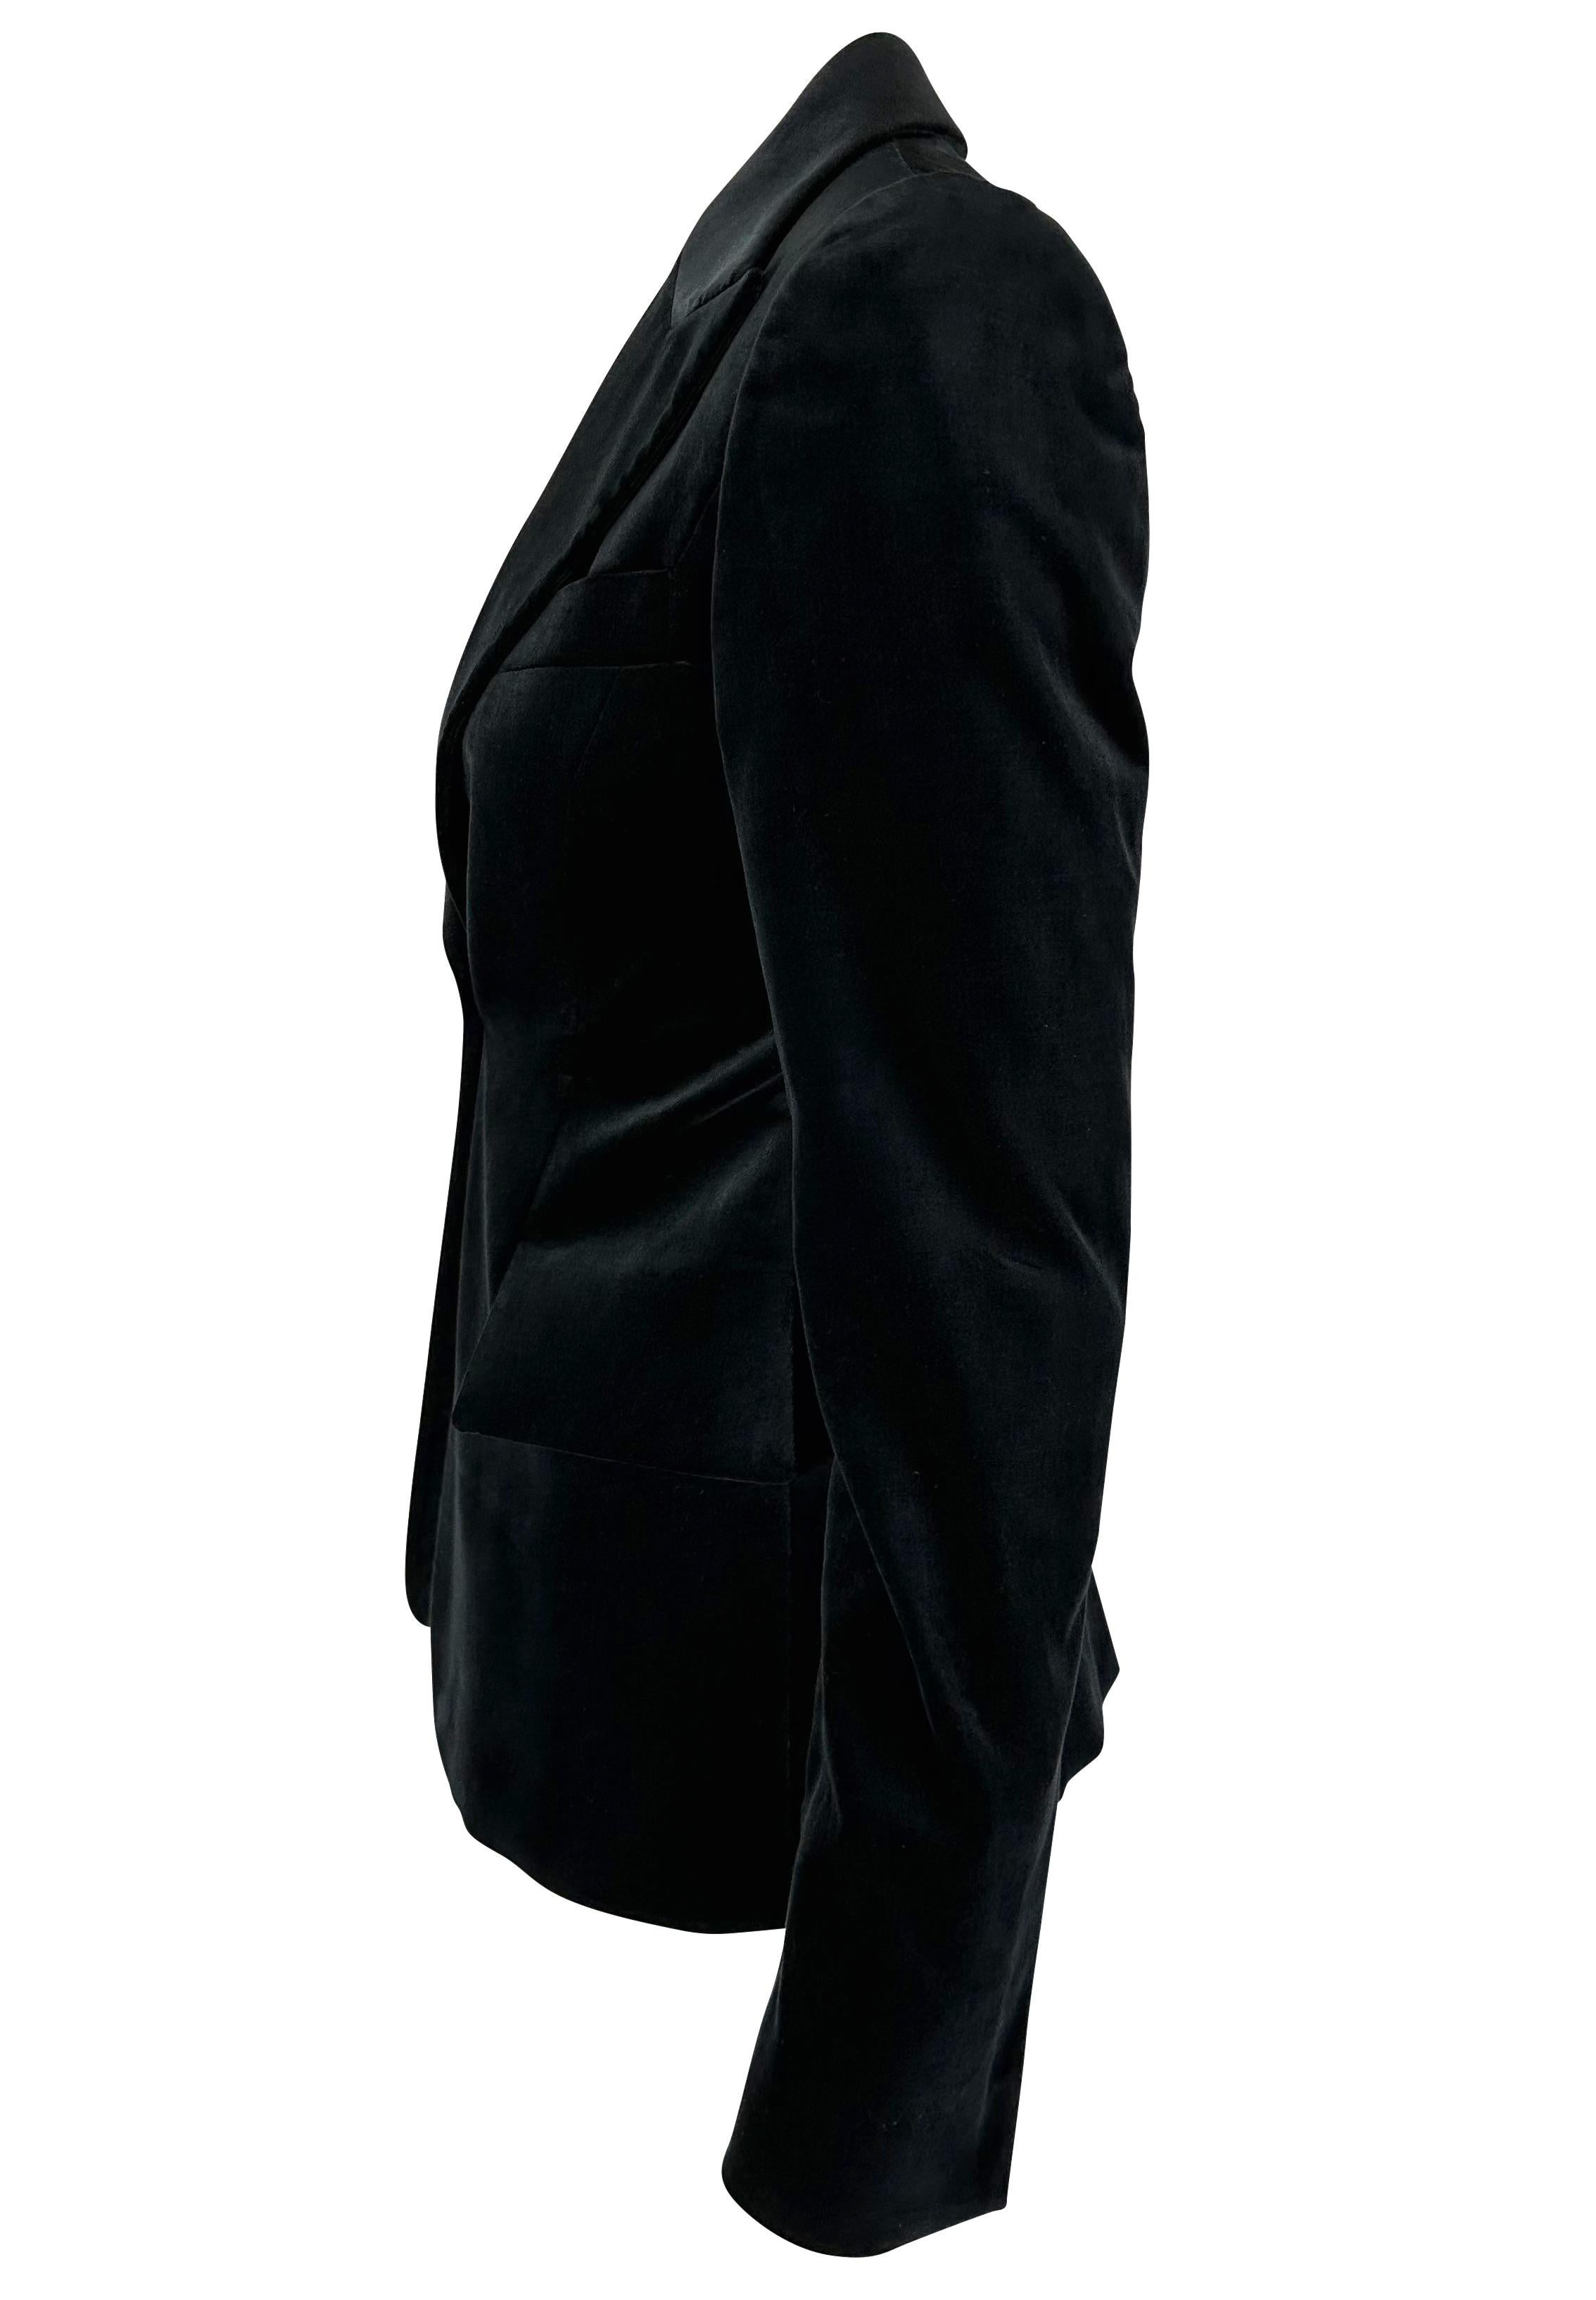 F/W 2003 Gucci by Tom Ford Black Velvet Peak Lapel Blazer Jacket In Excellent Condition For Sale In West Hollywood, CA